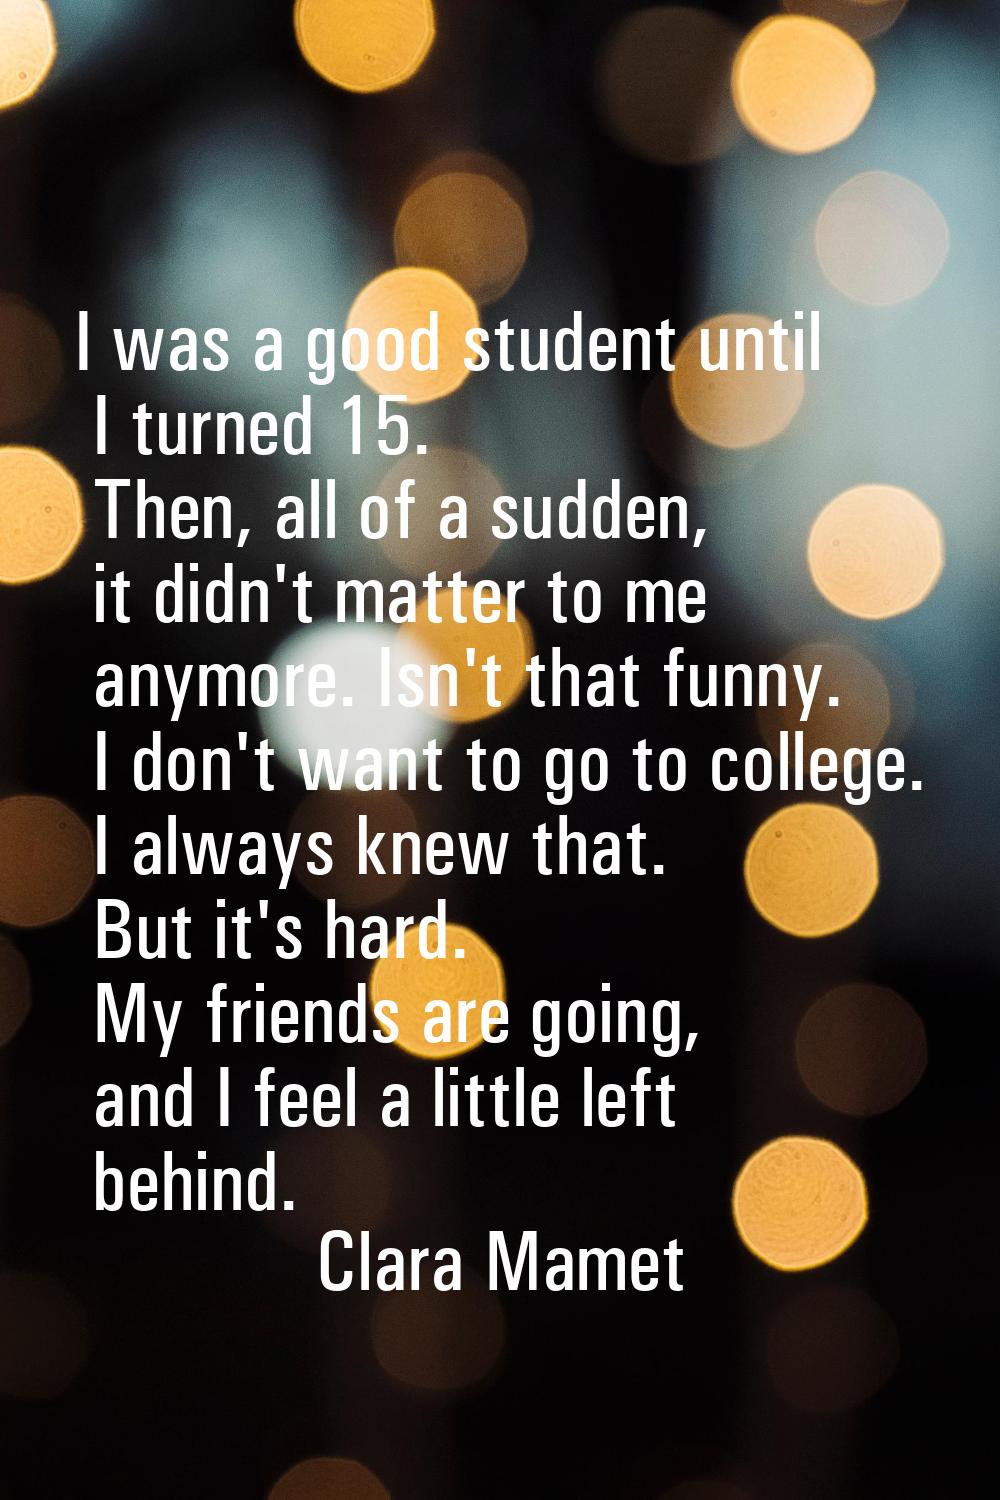 I was a good student until I turned 15. Then, all of a sudden, it didn't matter to me anymore. Isn'